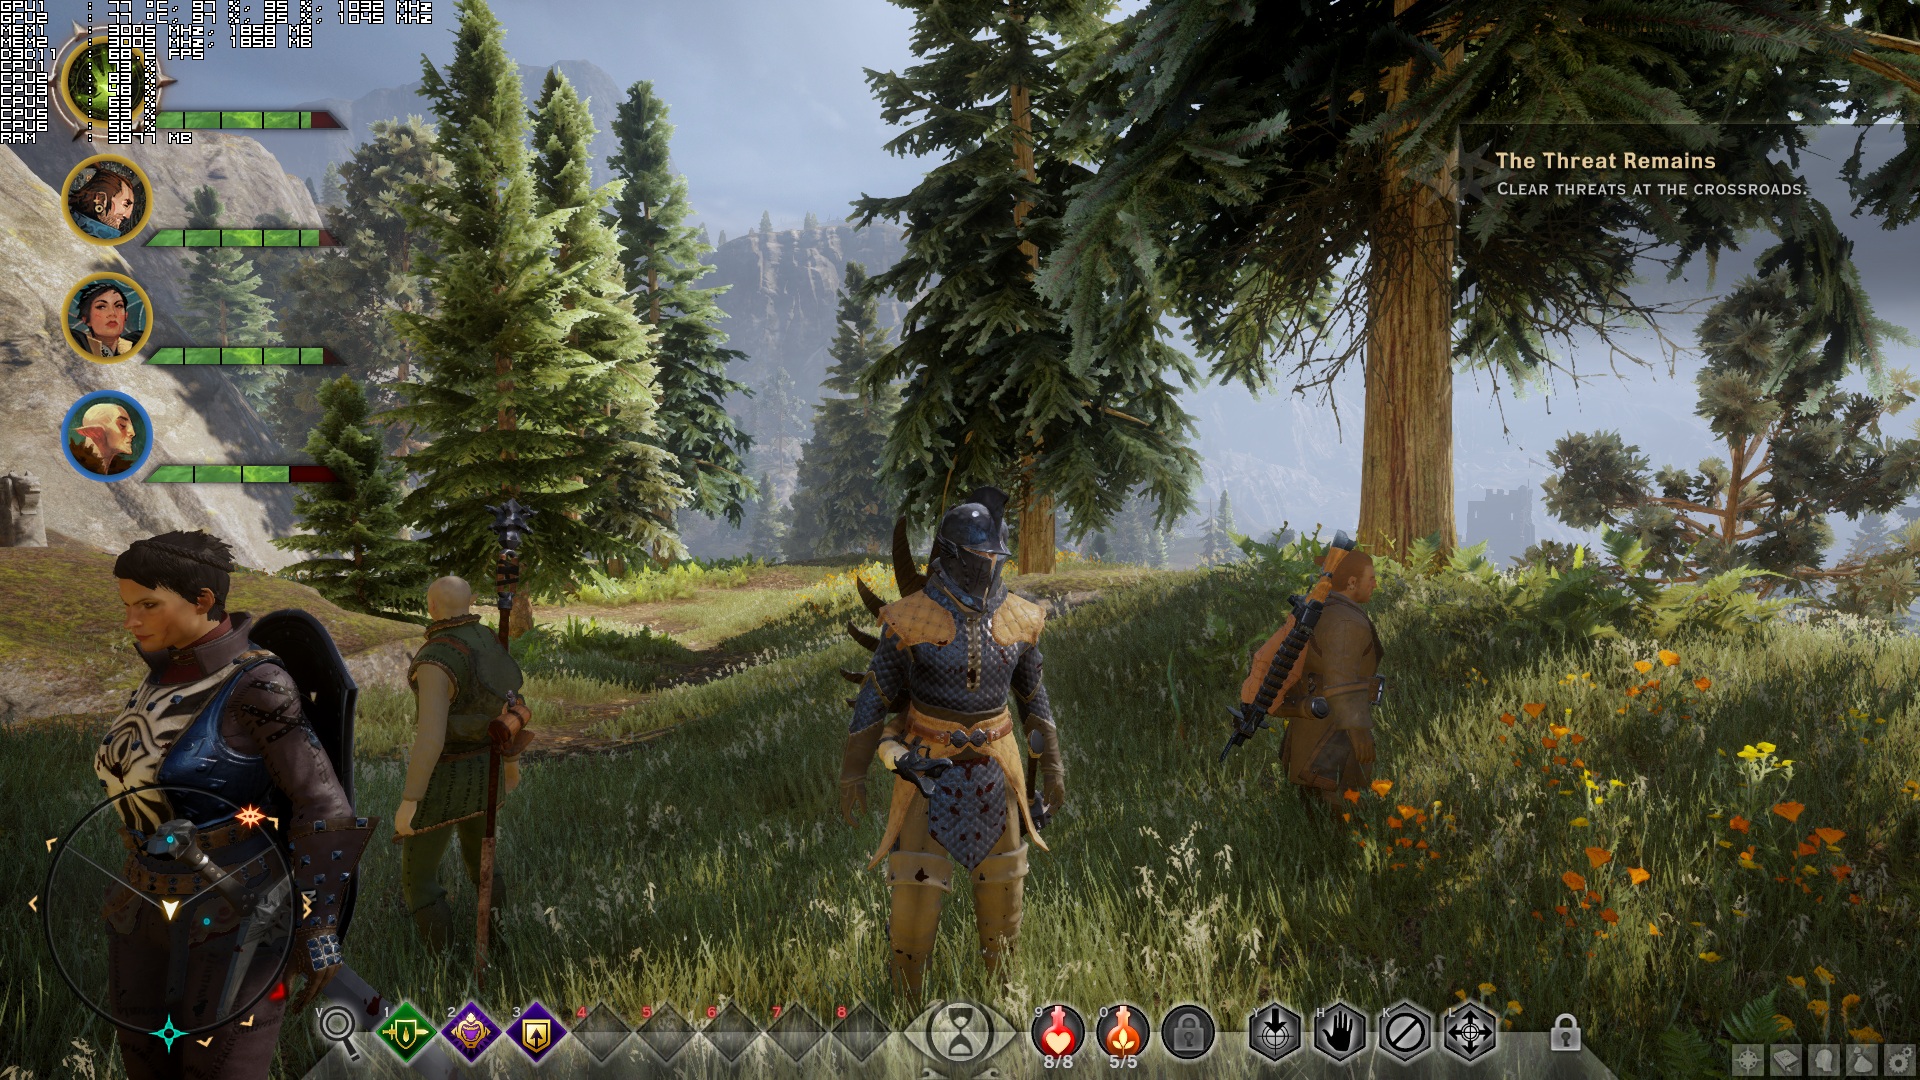 Dragon Age Inquisition Pc Performance Analysis